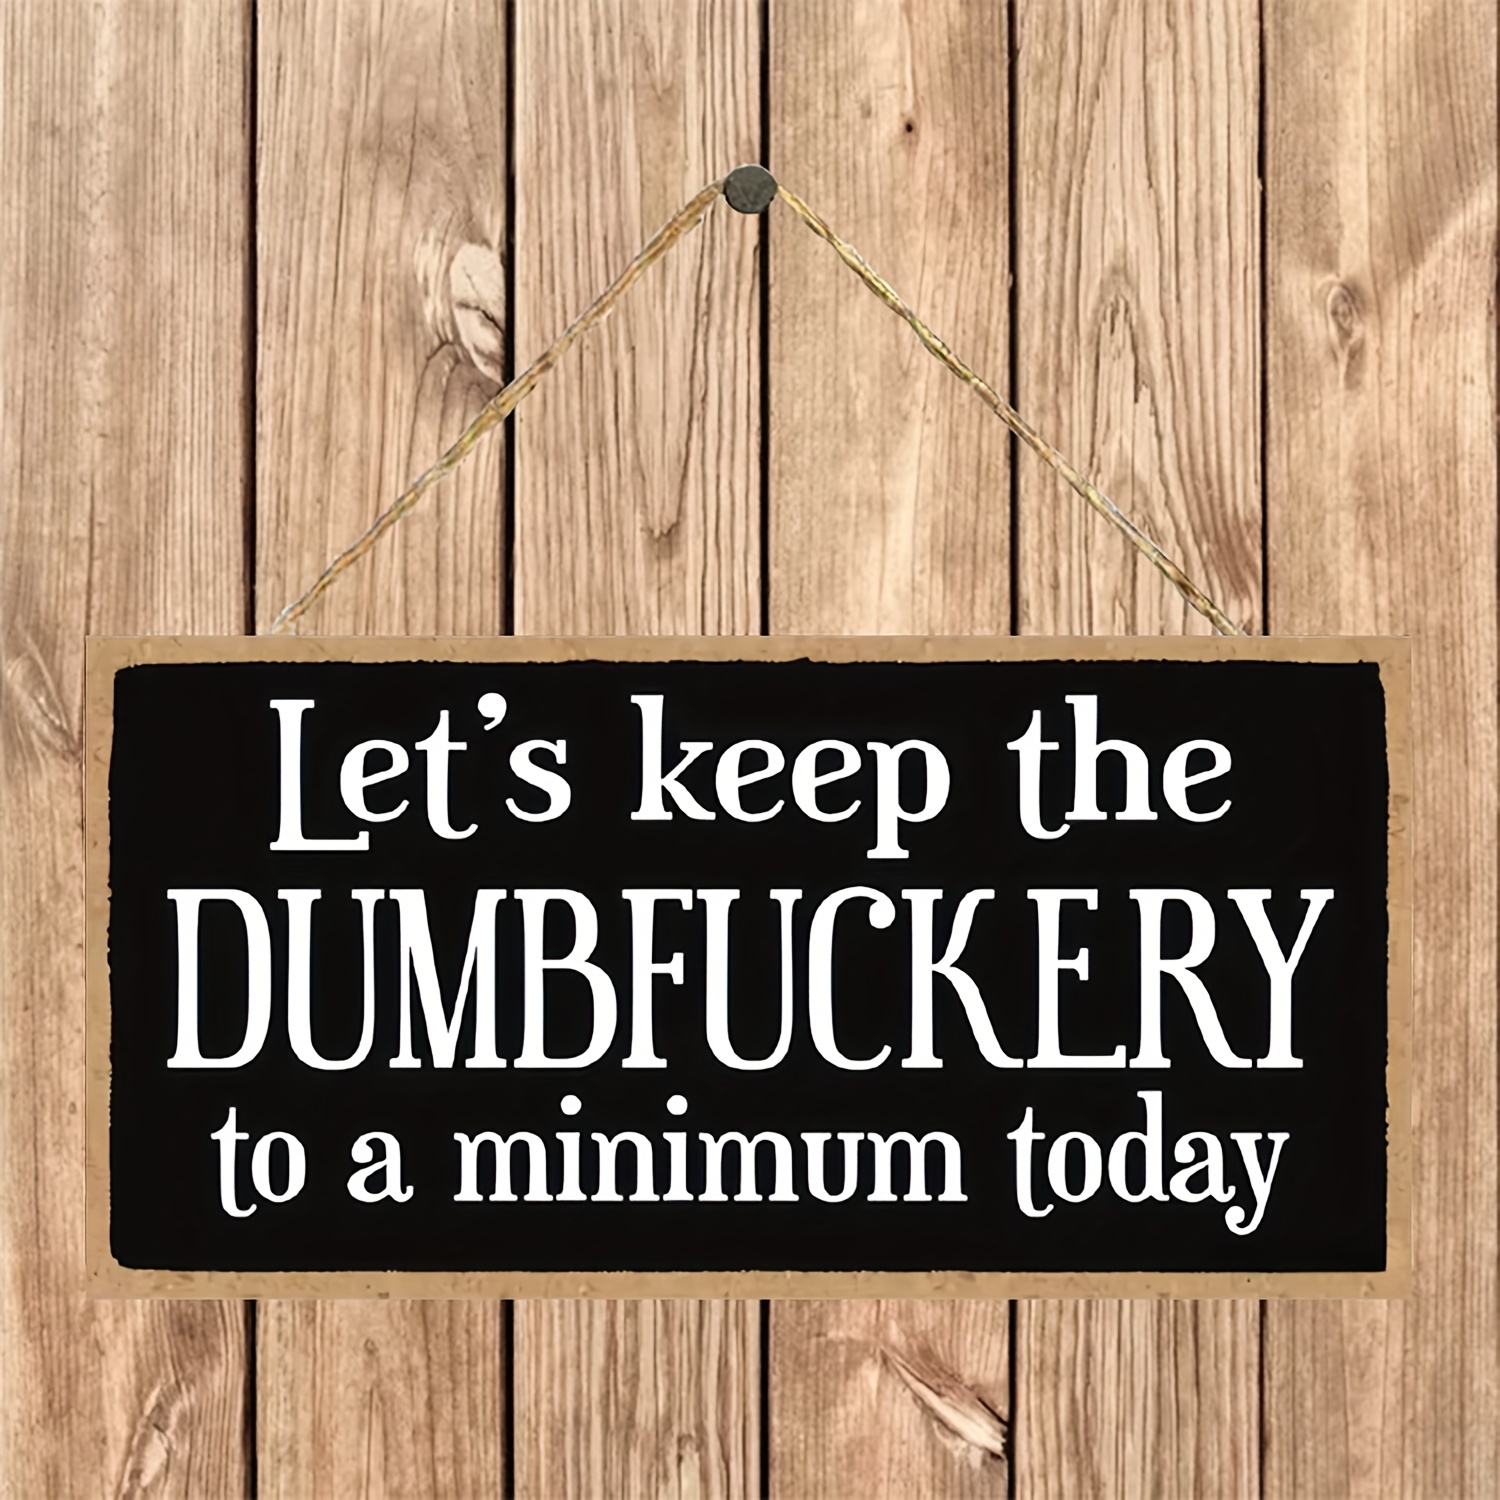 Let's Keep the Dumbfuckery to a Minimum Today funny insulated